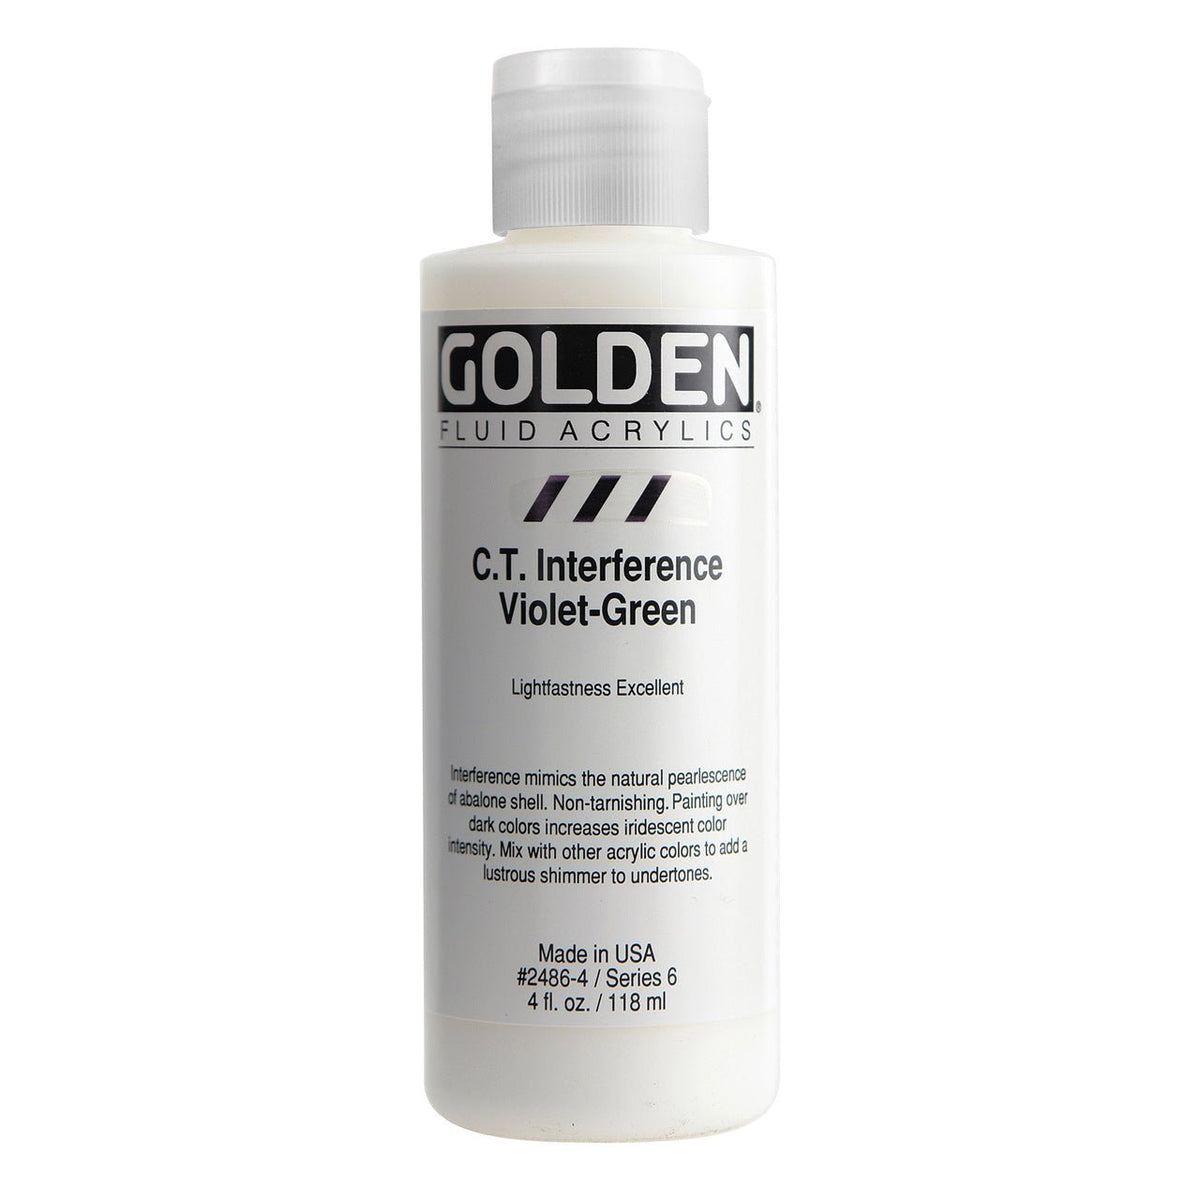 Golden Fluid Acrylic Interference C.T. Violet-Green 4 oz - merriartist.com